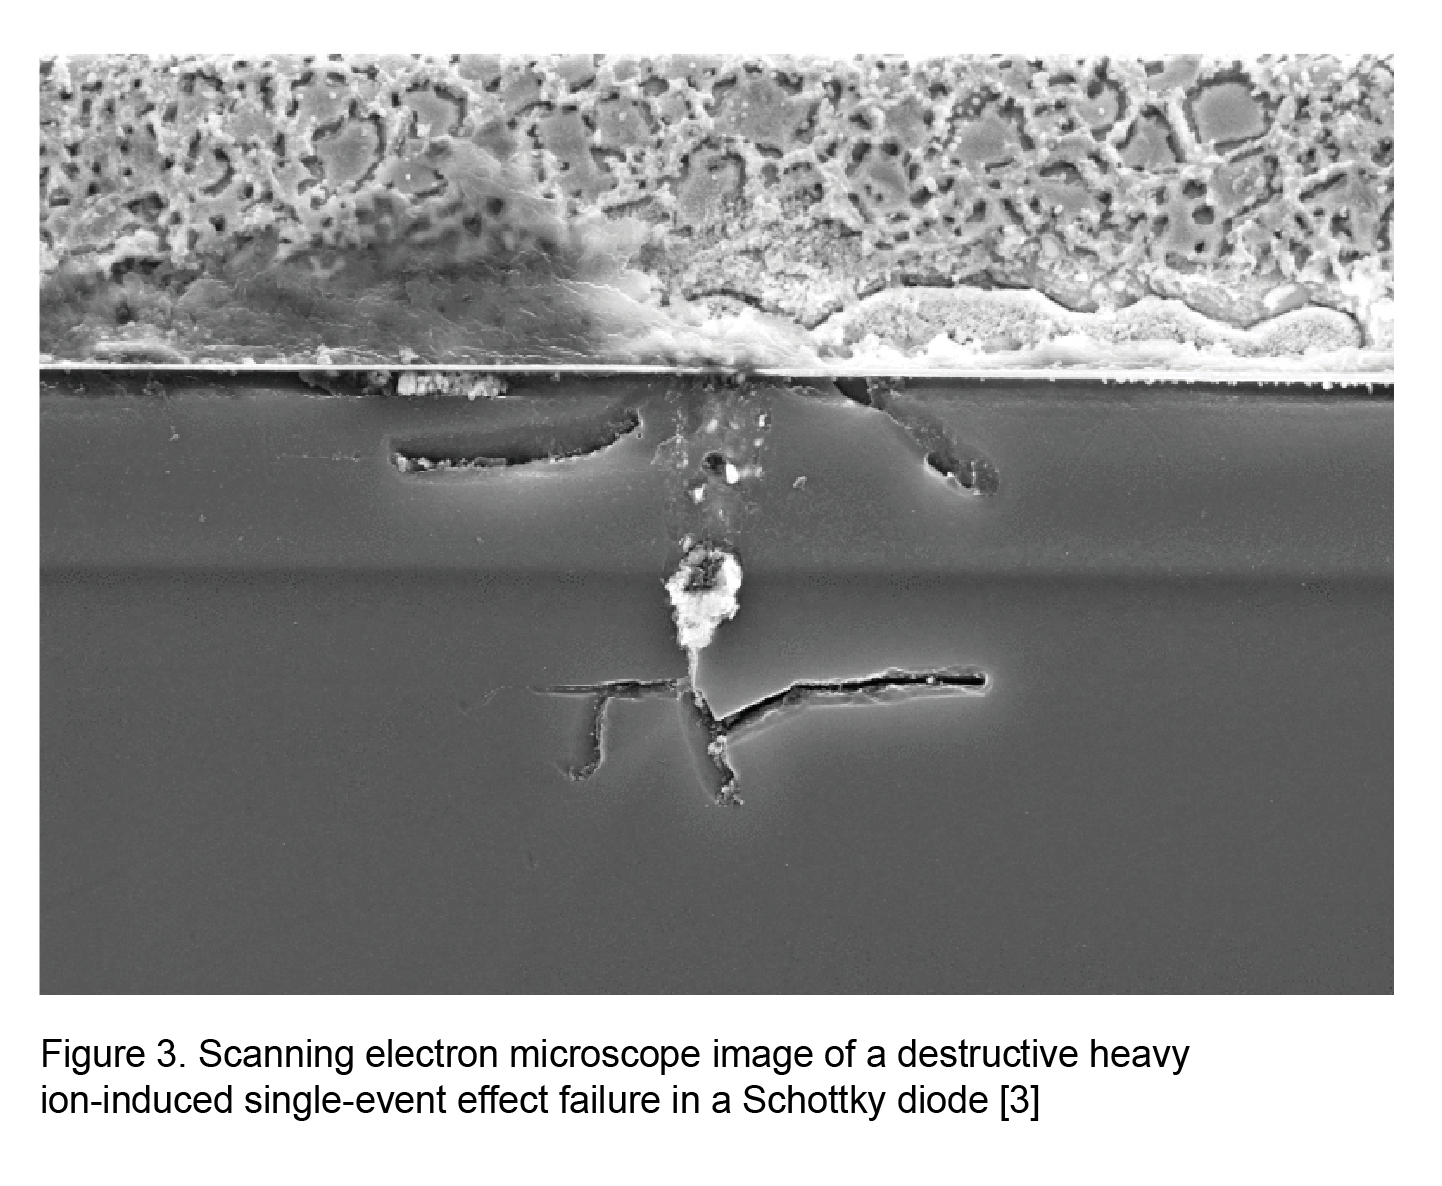 Scanning electron microscope image of a destructive heavy ion-induced single-event effect failure in a Schottky diode [3]